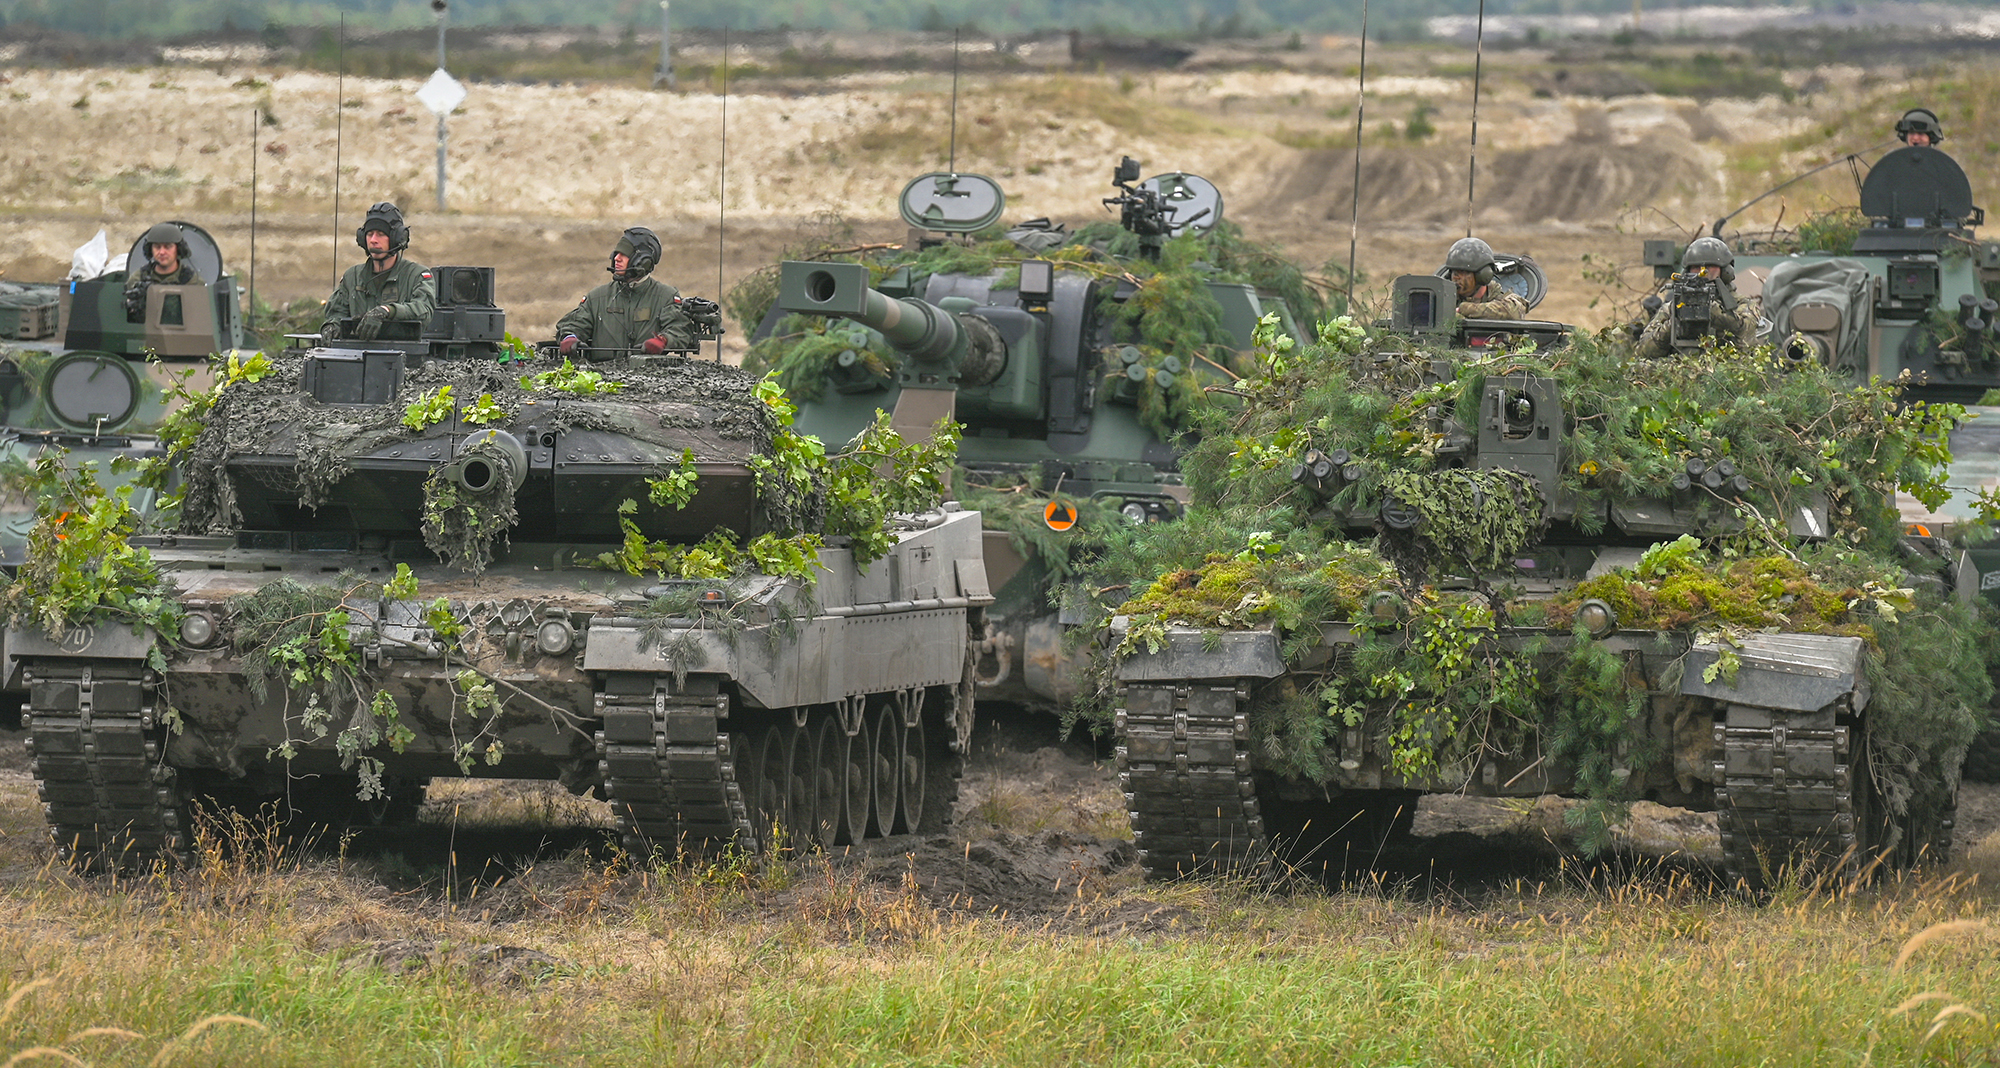 The German-made Leopard tanks used by the Polish army, at Poland's training ground in Nowa Deba on September 21.